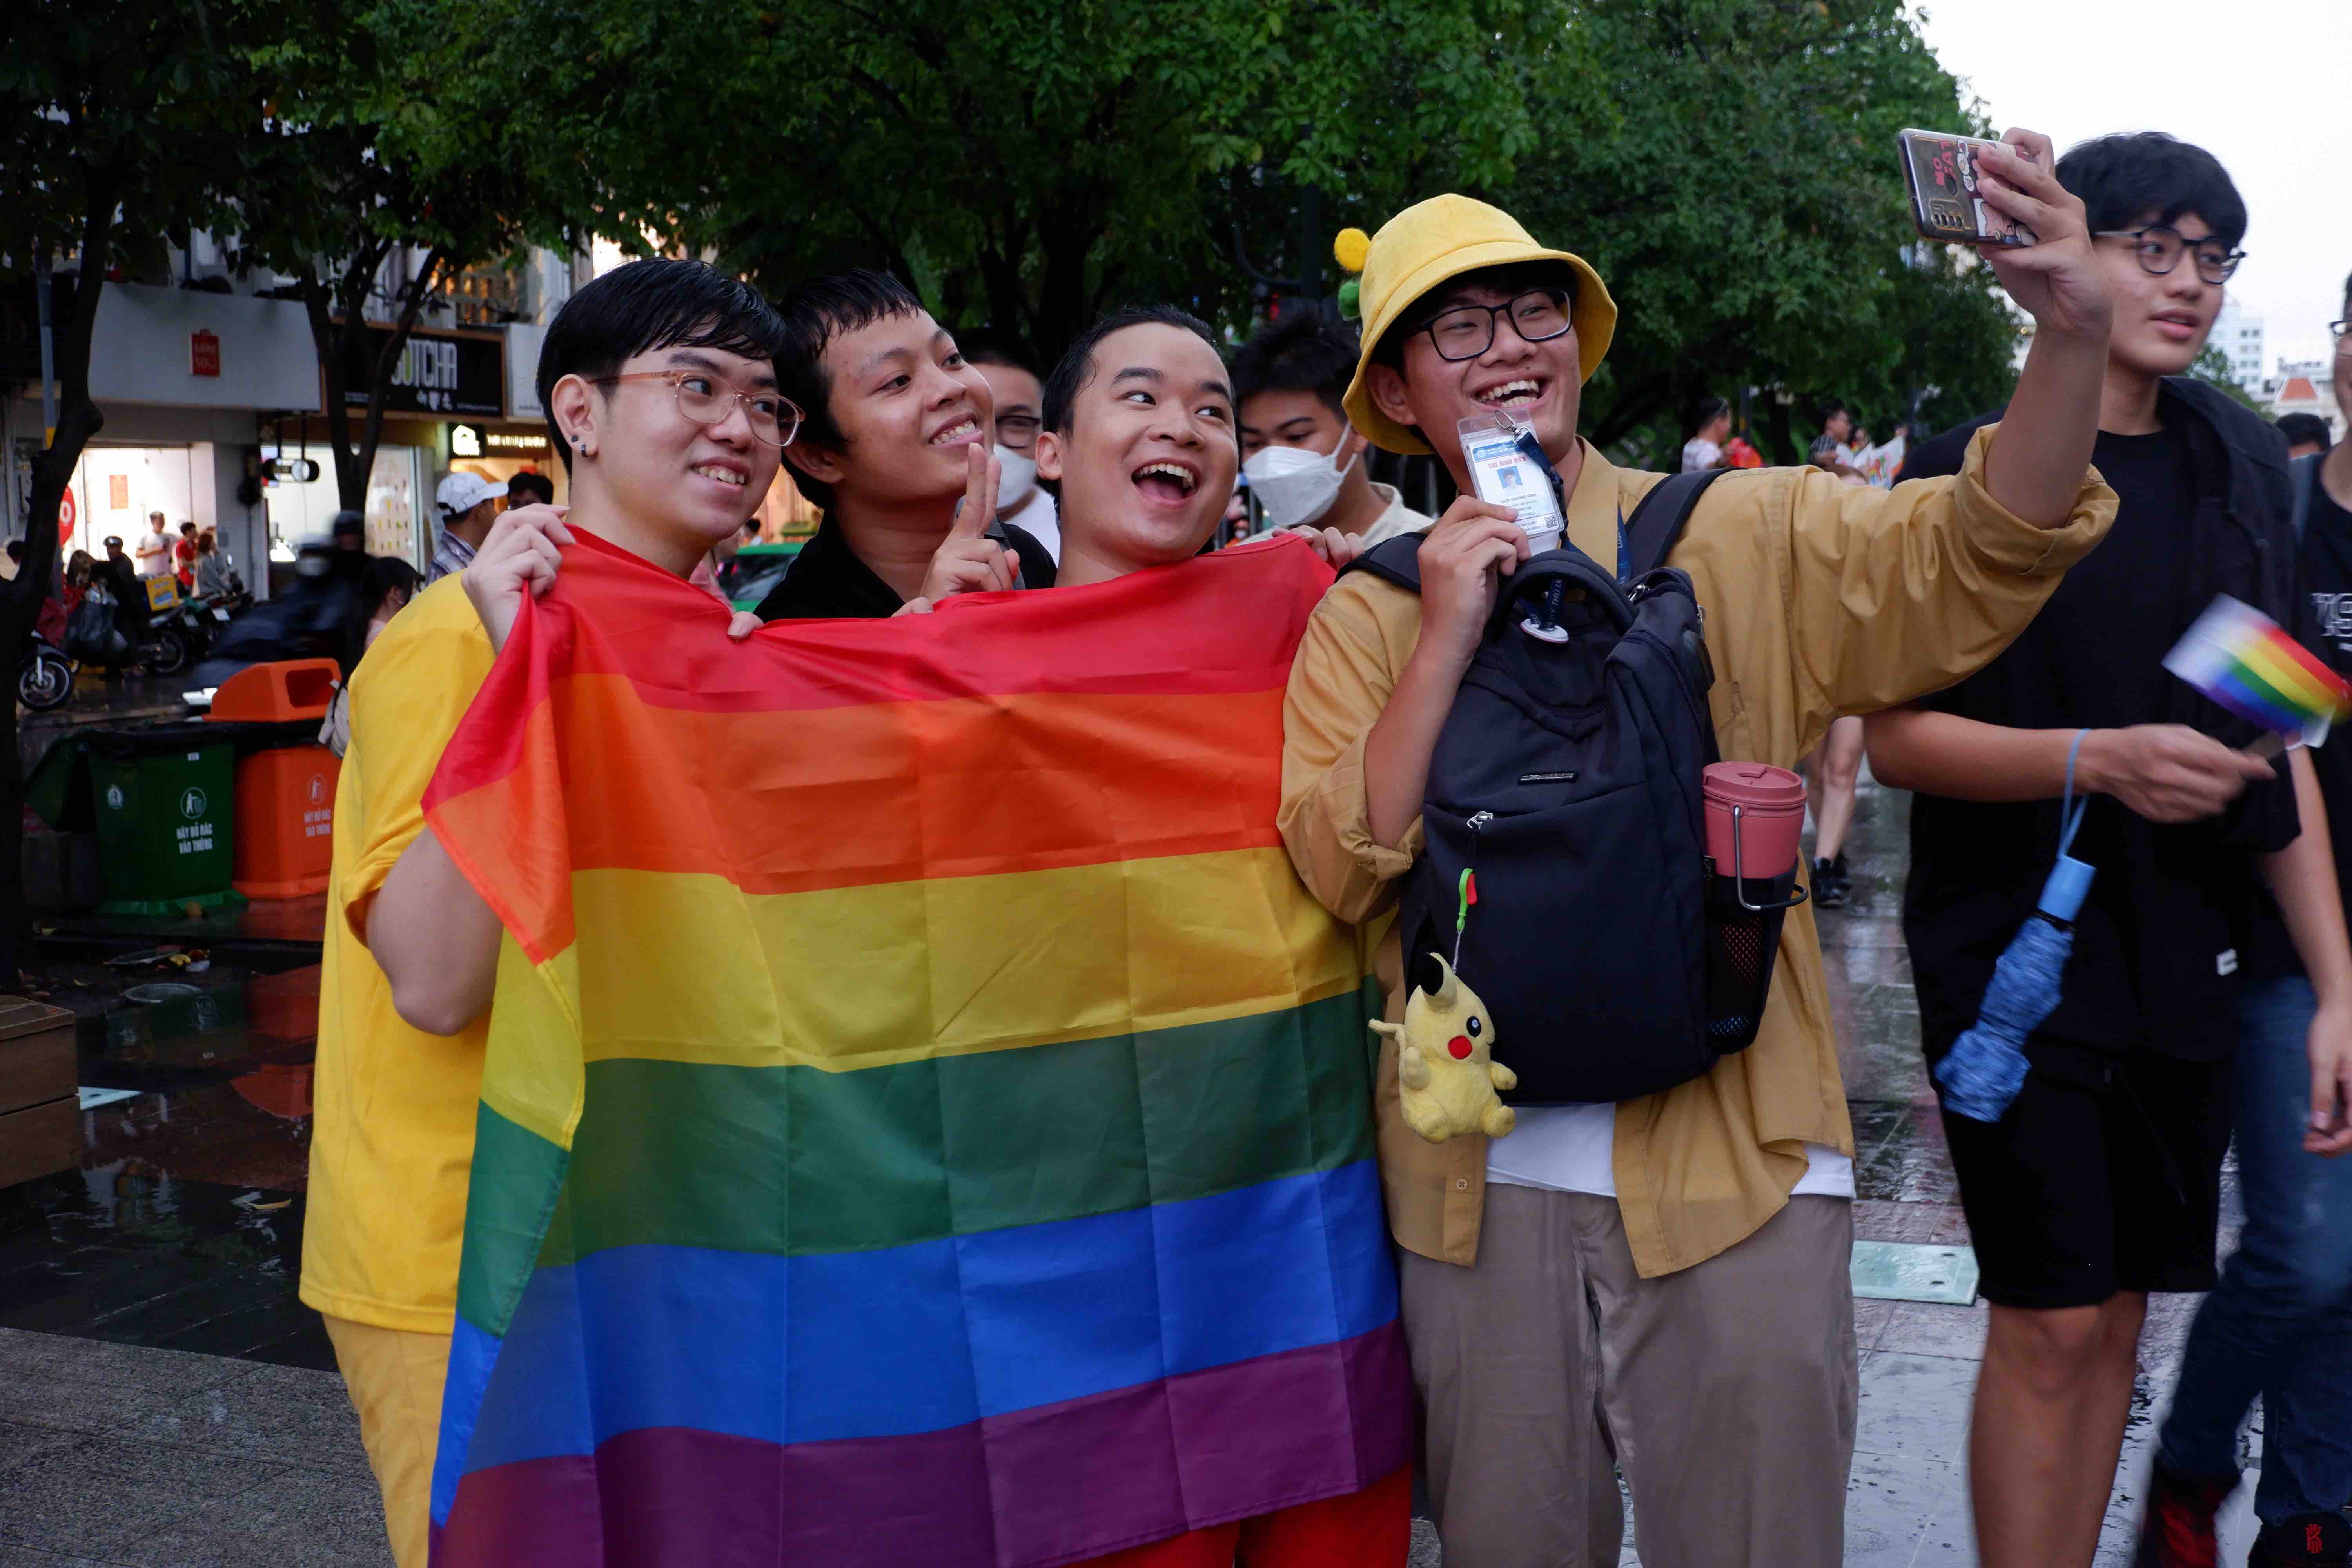 A group of friends pose for a selfie photo at VietPride 2022 parade in Ho Chi Minh City on October 1, 2022. Photo: Linh To / Tuoi Tre News